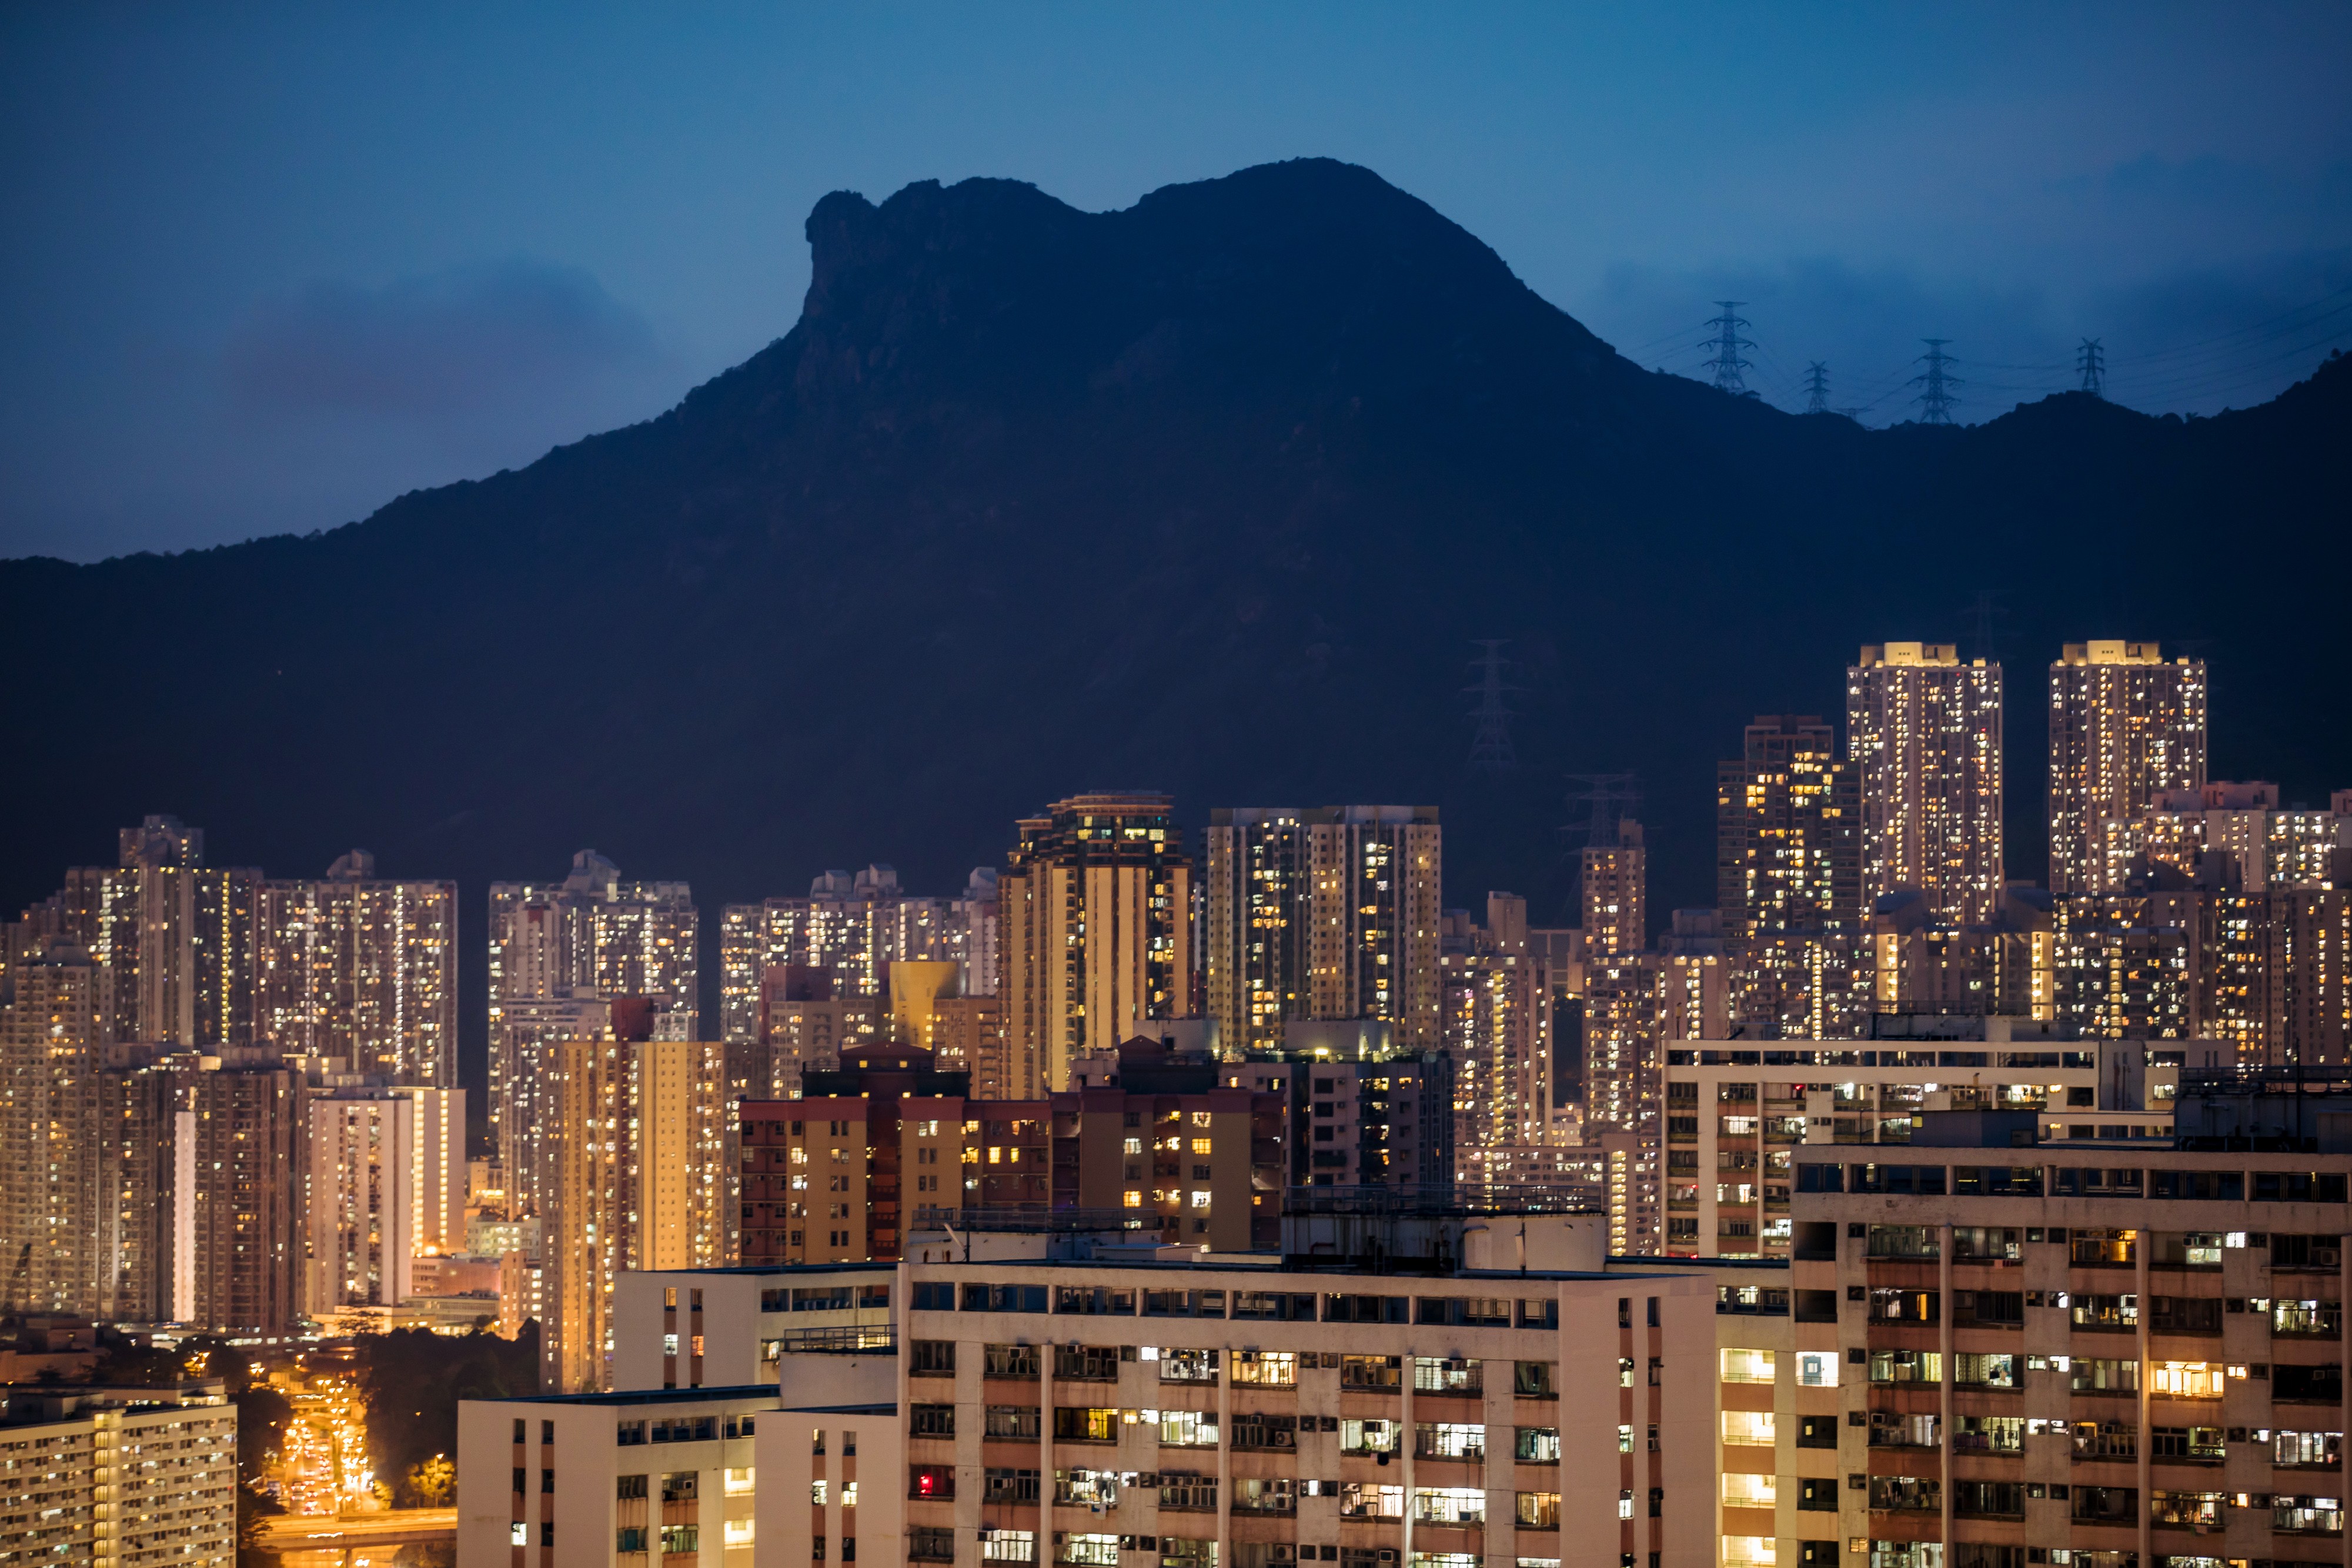 Lion Rock at dusk in Hong Kong, a symbol of the trail running community – self-sufficient and welcoming. Photo: Bloomberg